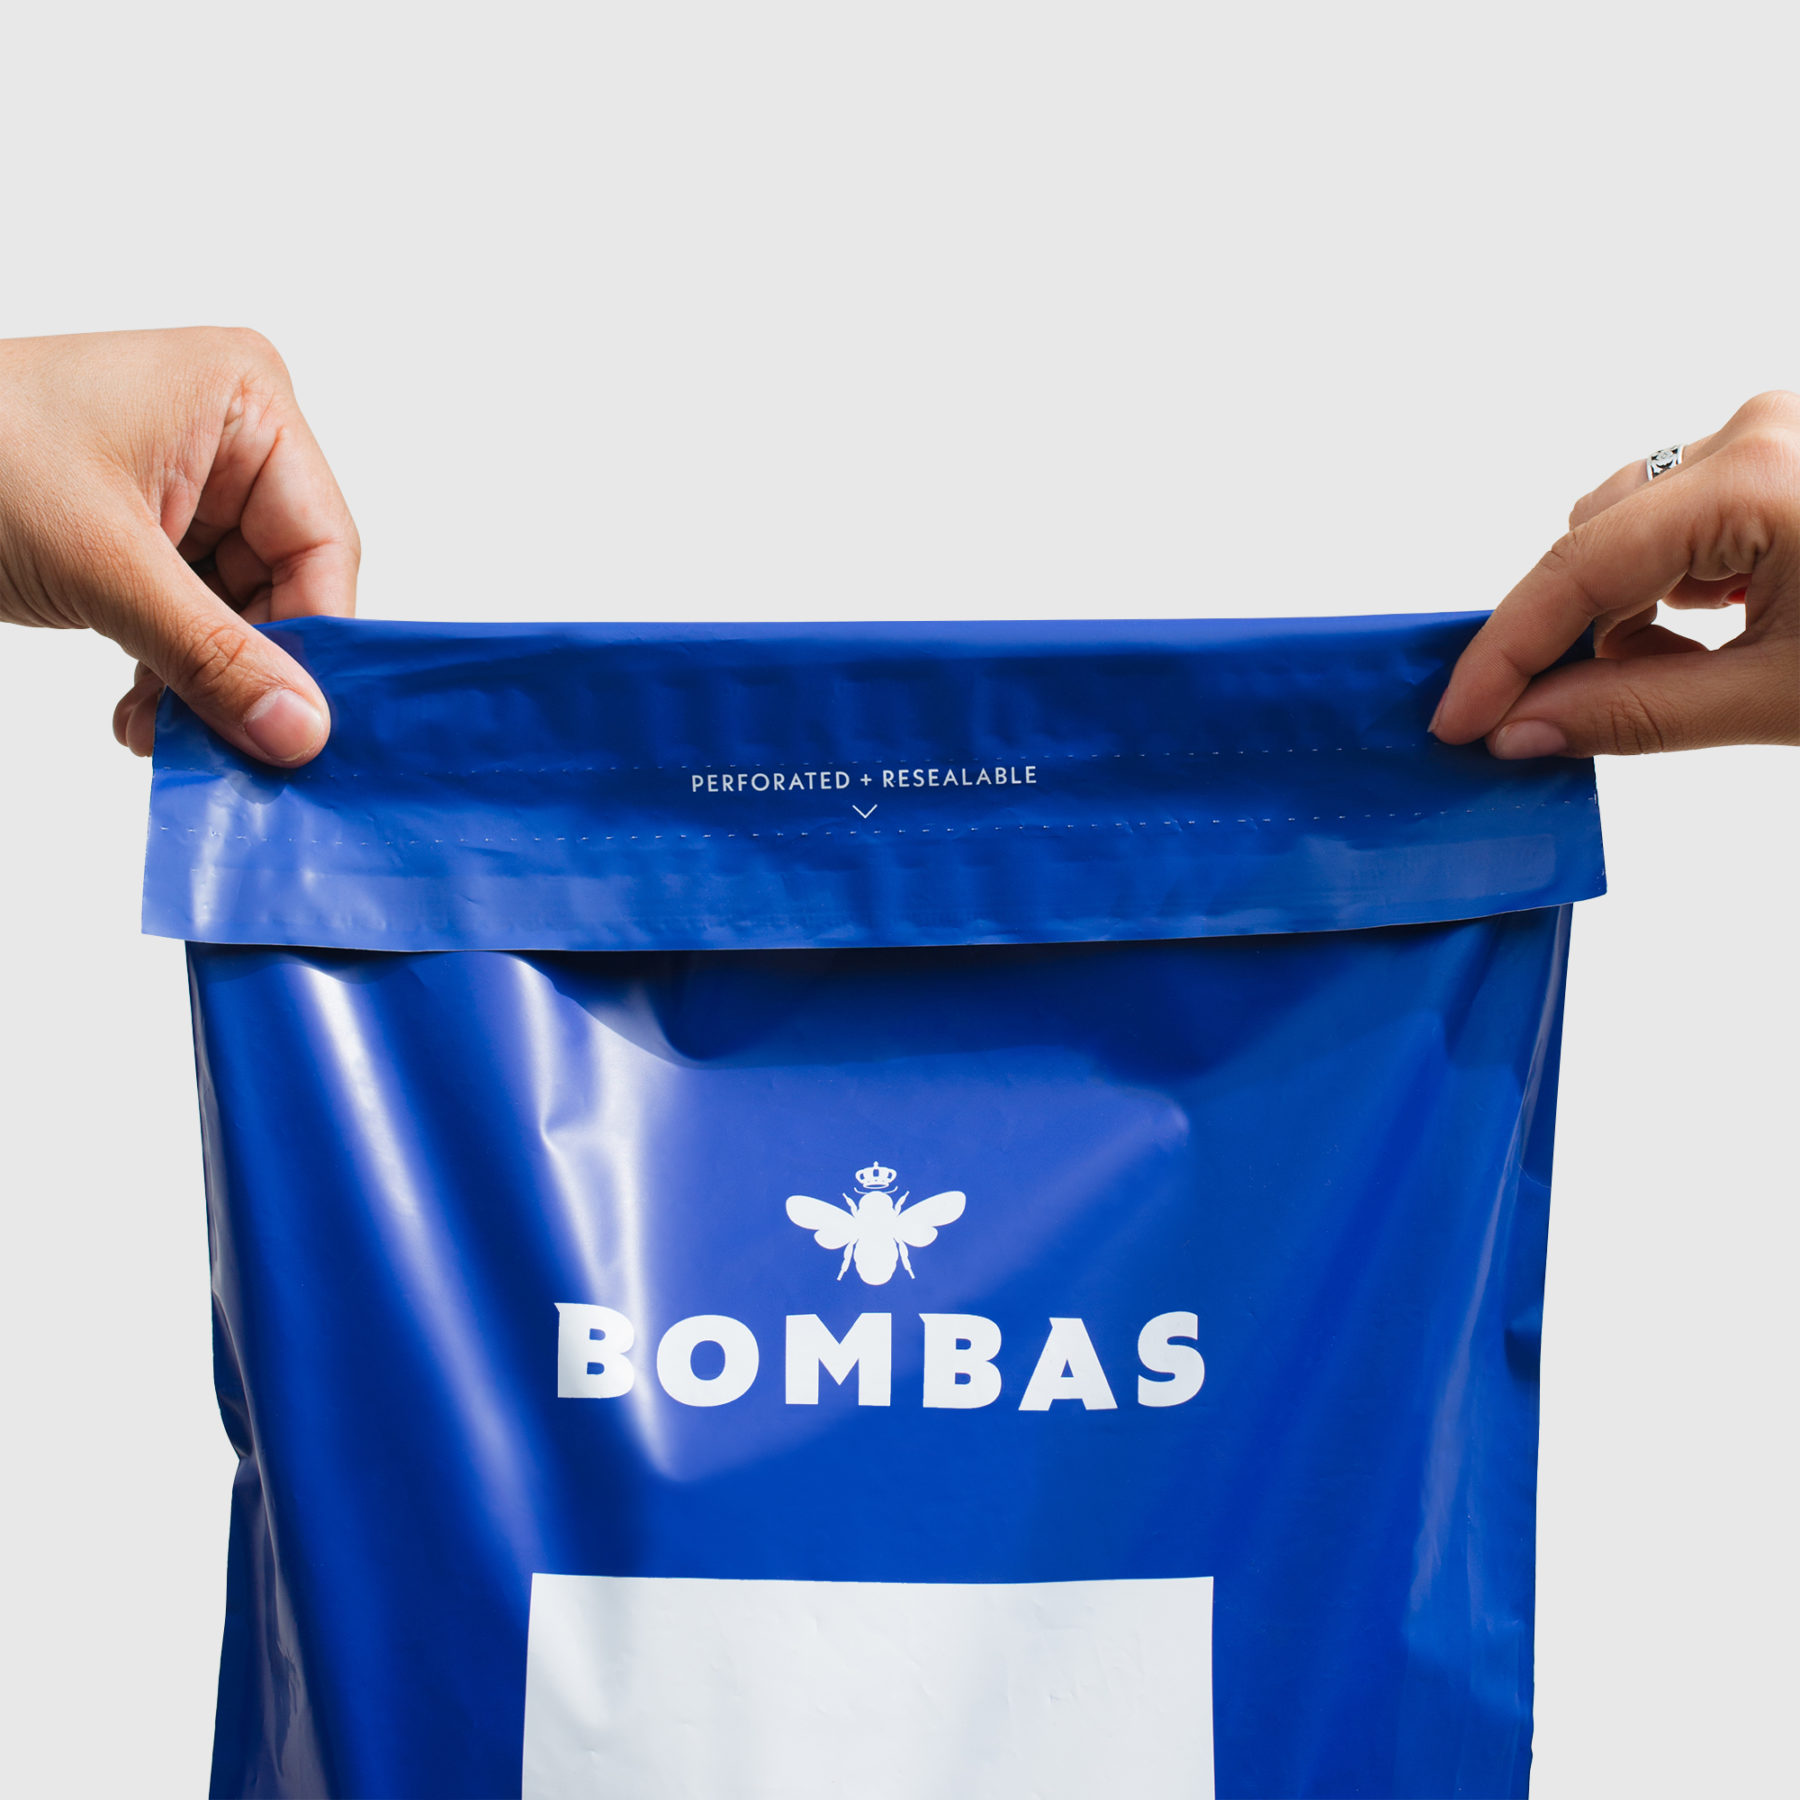 Bombas uses Lumi to produce Poly Mailers with tear strips and adhesive strips for easy returns. Watch our full unboxing video. Packaging Strategies for Efficient Returns